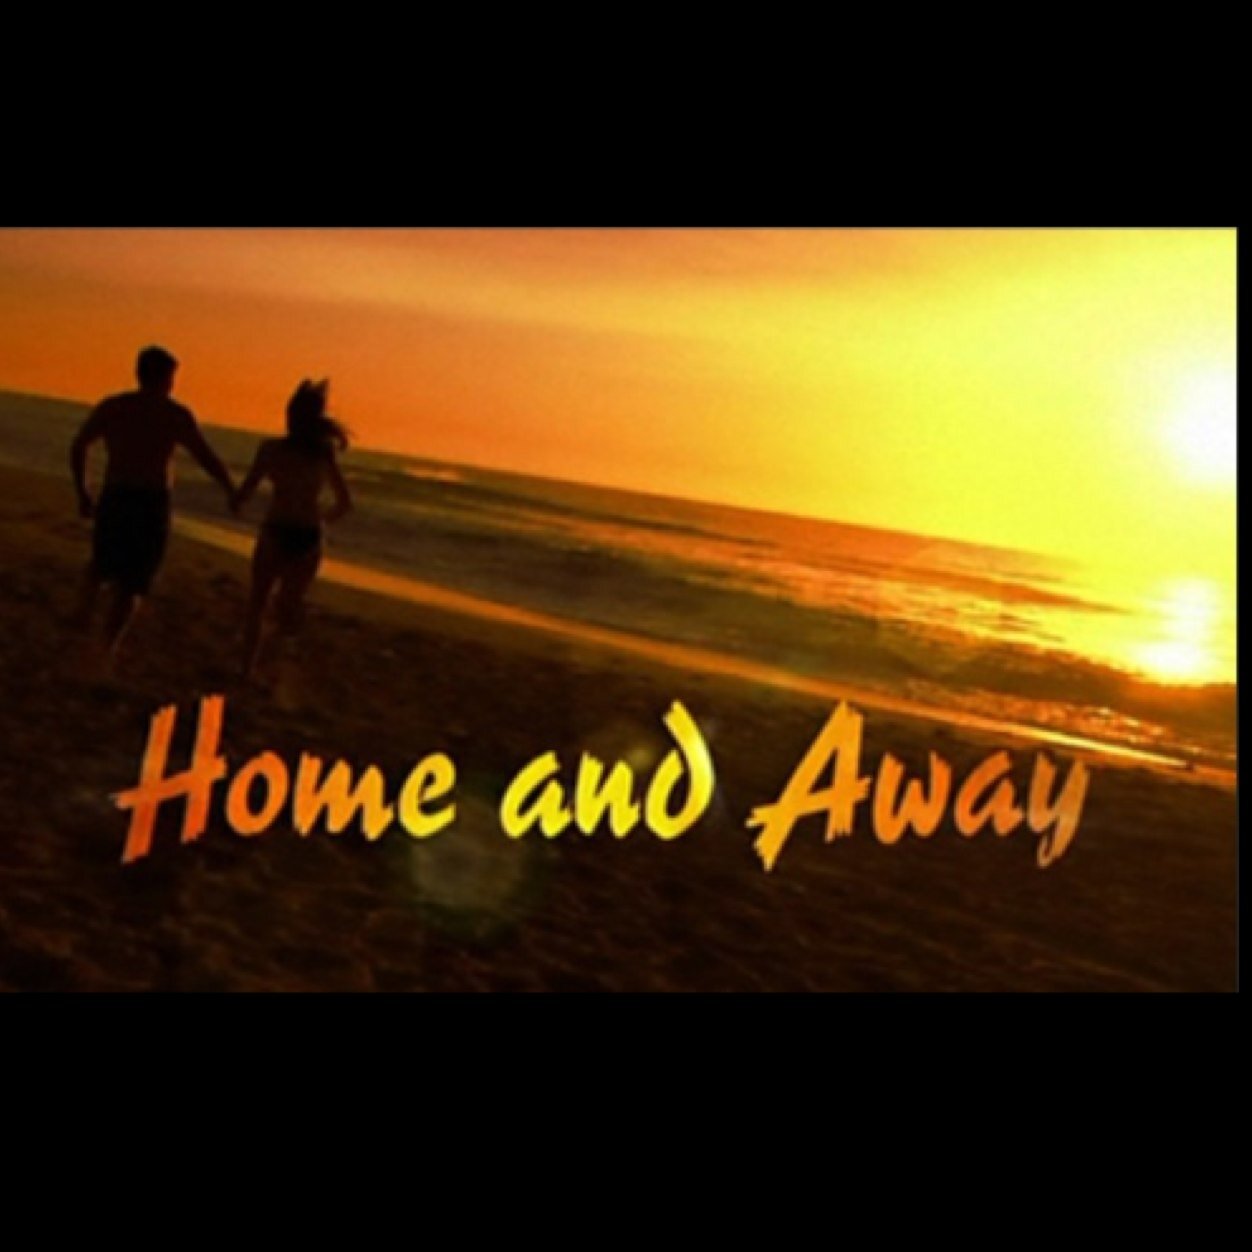 Home and away for life ❤